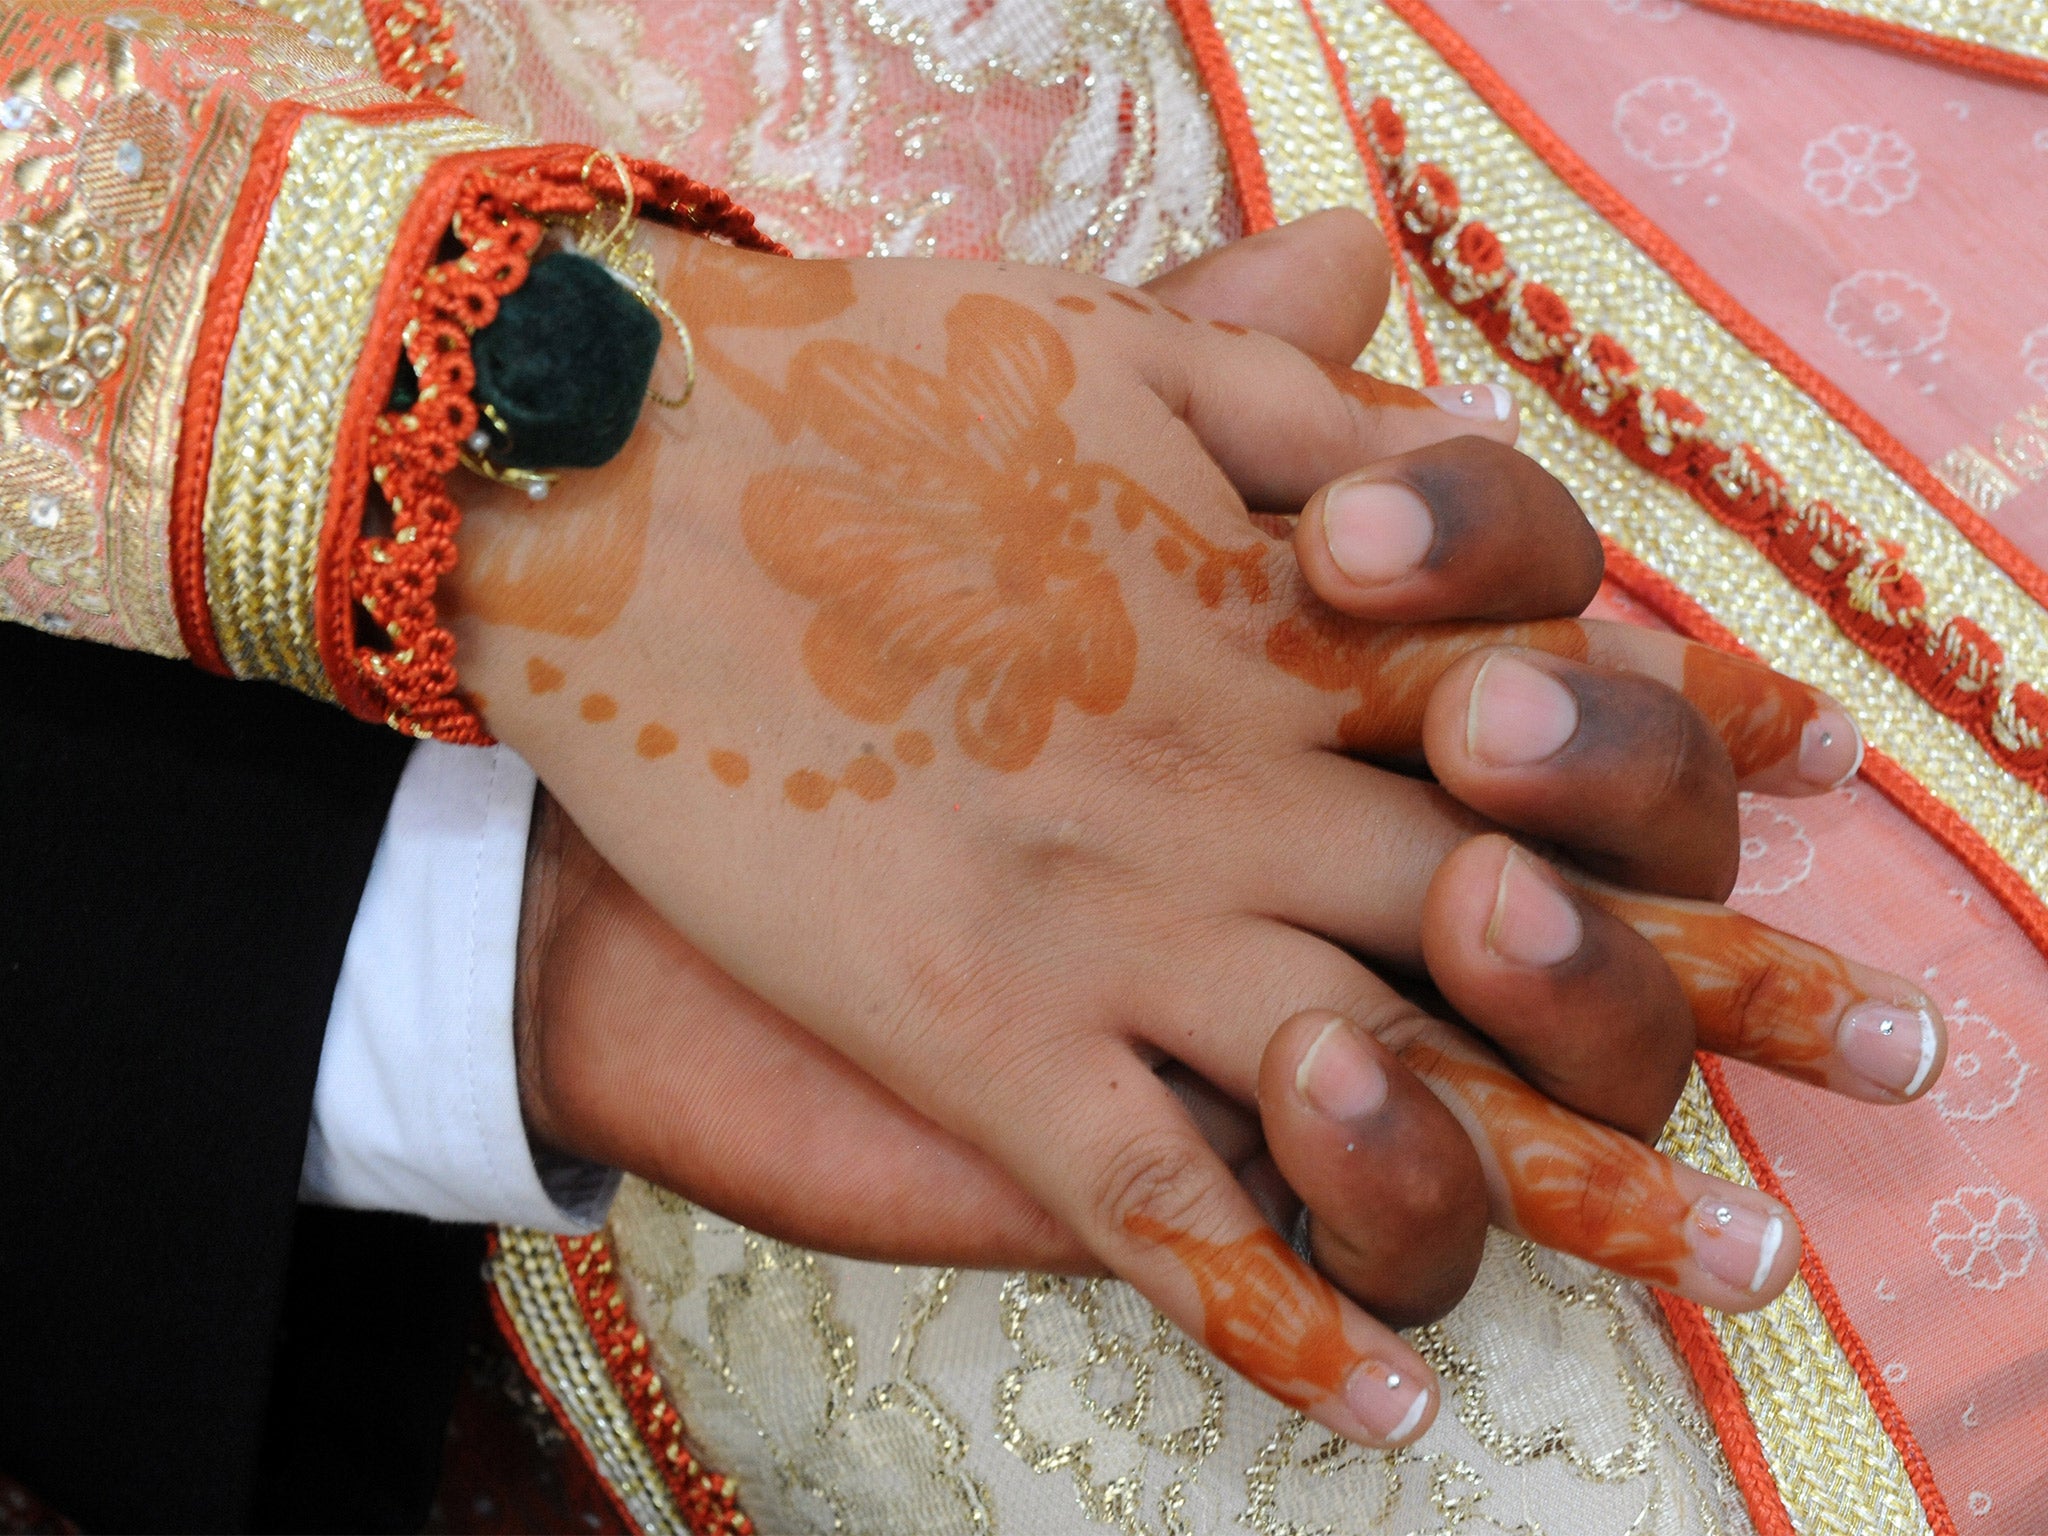 The report states many women will be unaware they do not have legal protections and marital rights due to not registering their marriage after having a religious ceremony